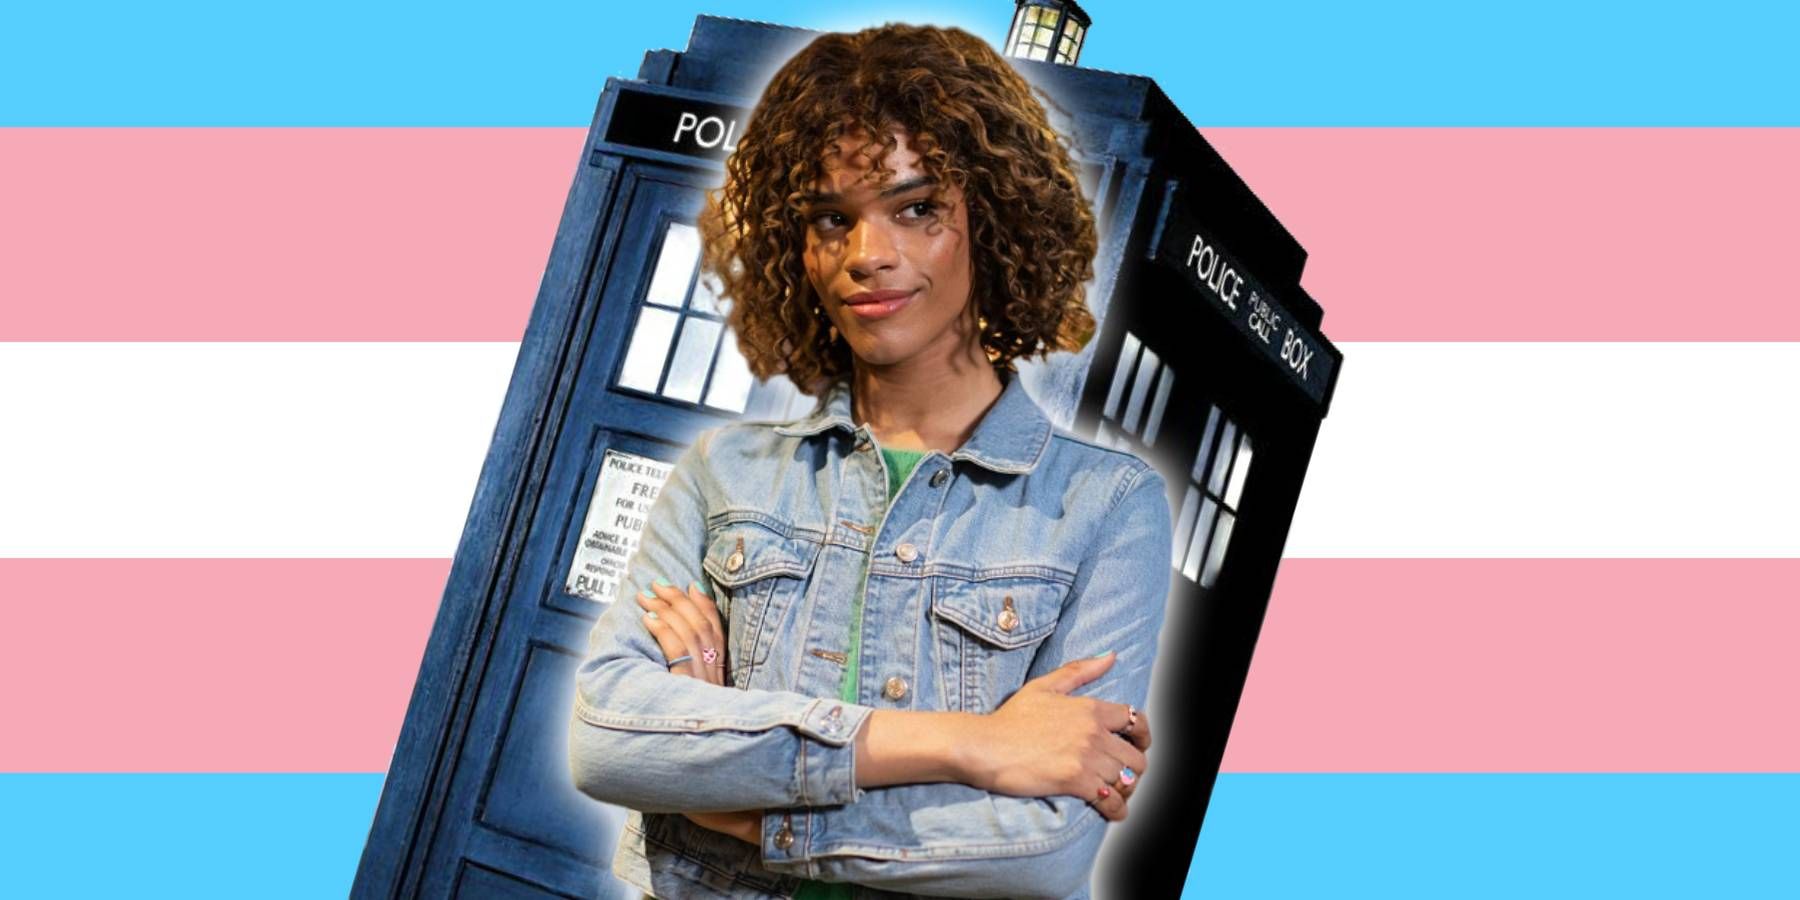 Yasmin Finney as Rose Noble from Doctor Who with the TARDIS in front of a transgender pride flag